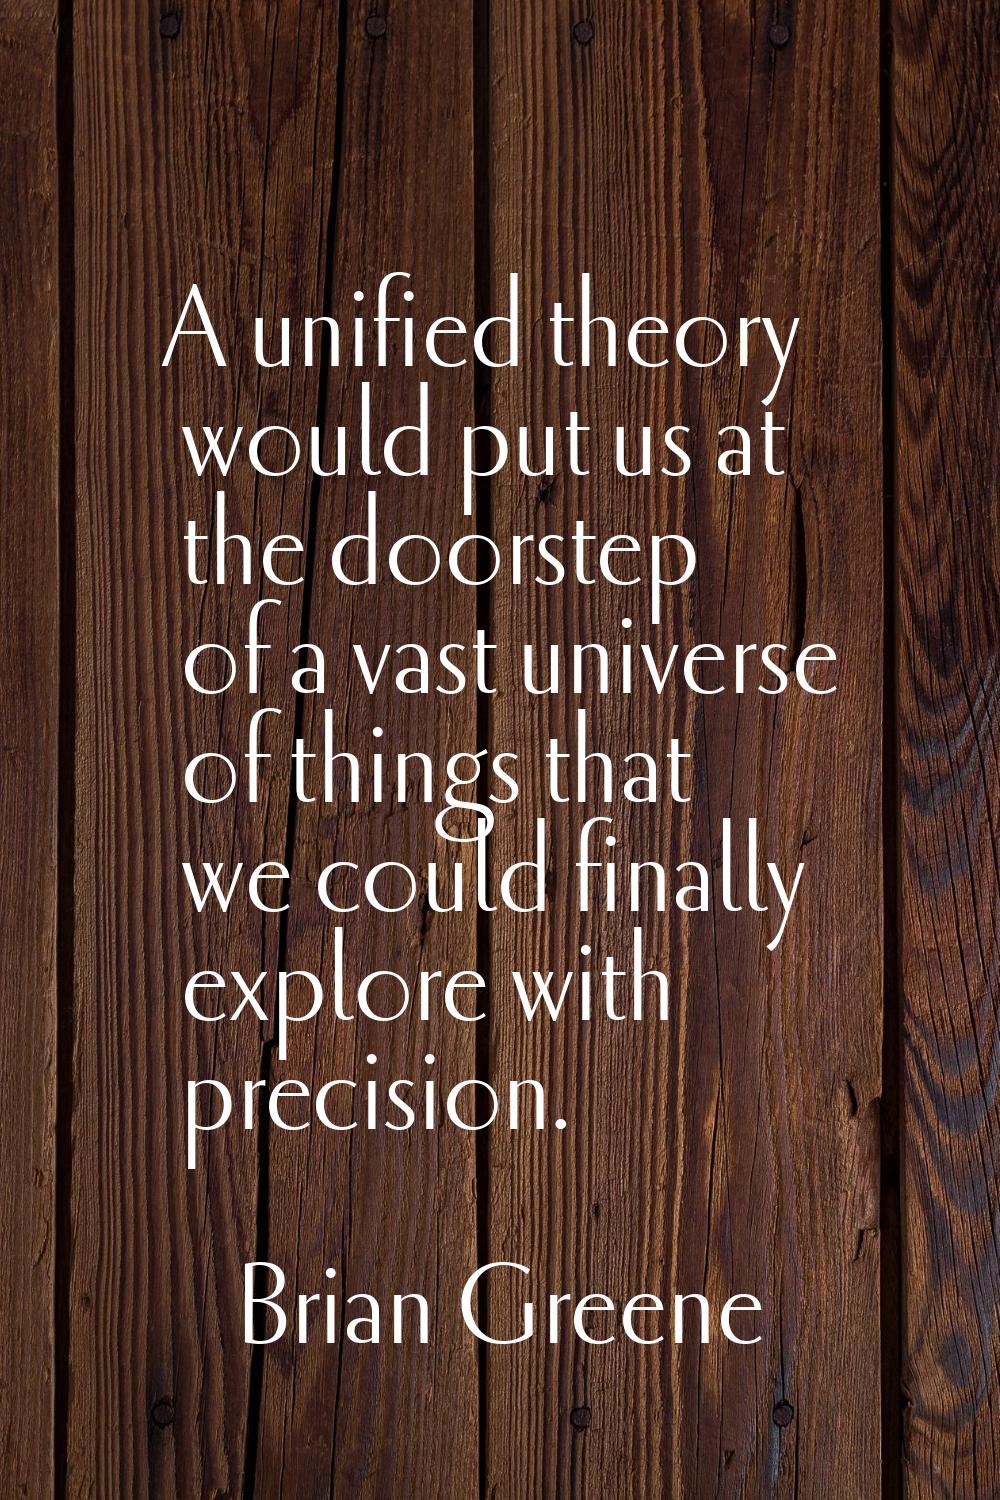 A unified theory would put us at the doorstep of a vast universe of things that we could finally ex